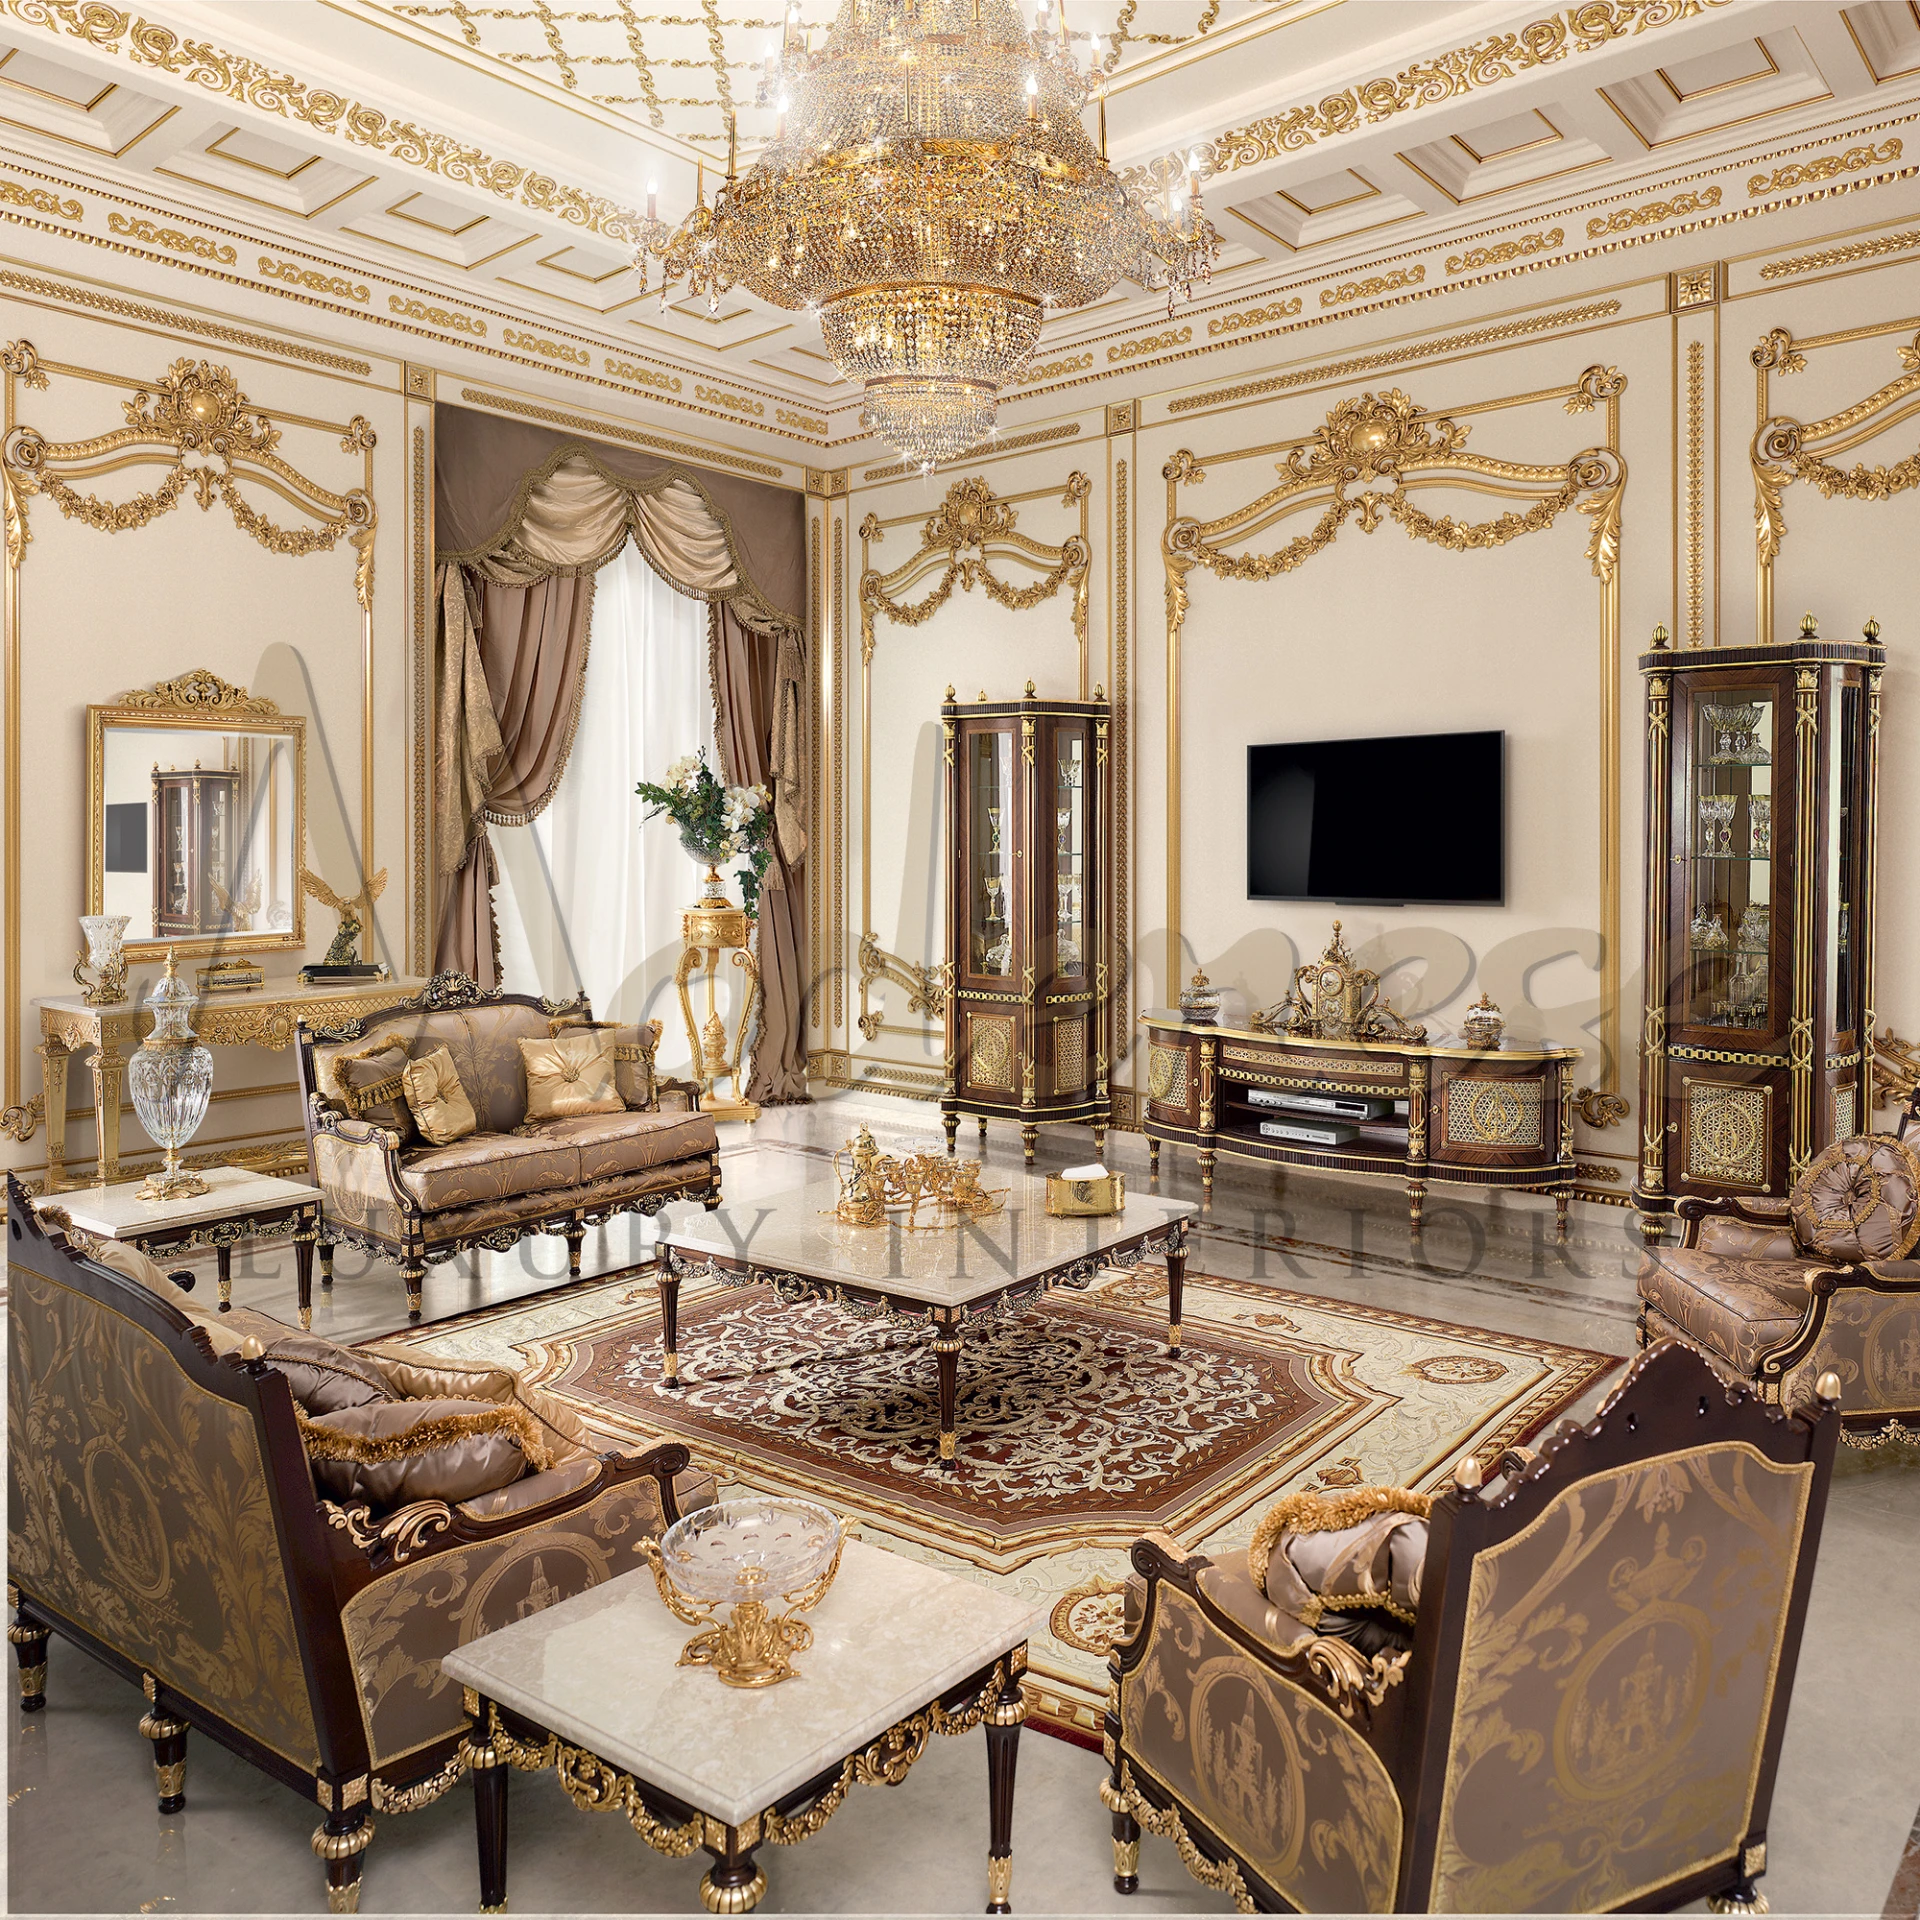 A luxurious room with detailed gold detailing, plush seating, and a lavish rug